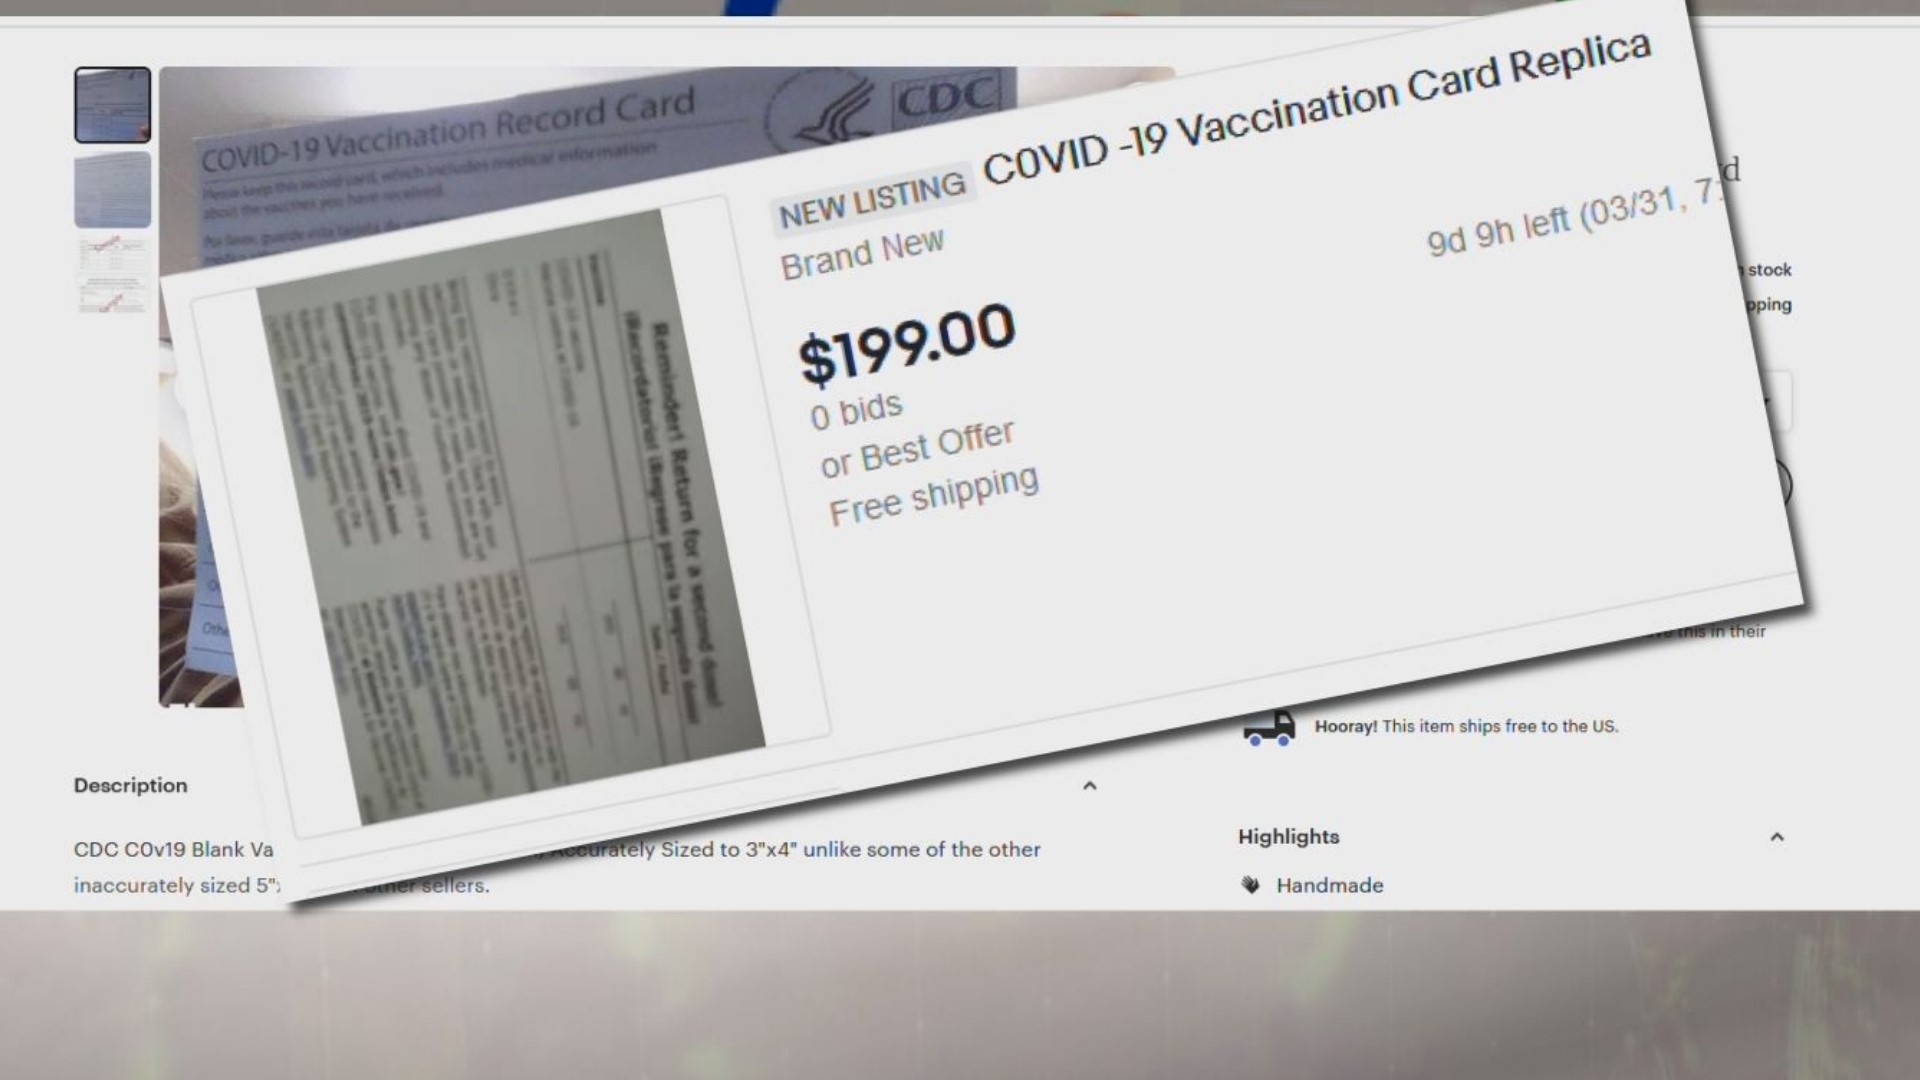 Now North Carolina's Attorney General is launching an investigation in fake COVID vaccine cards for sale.